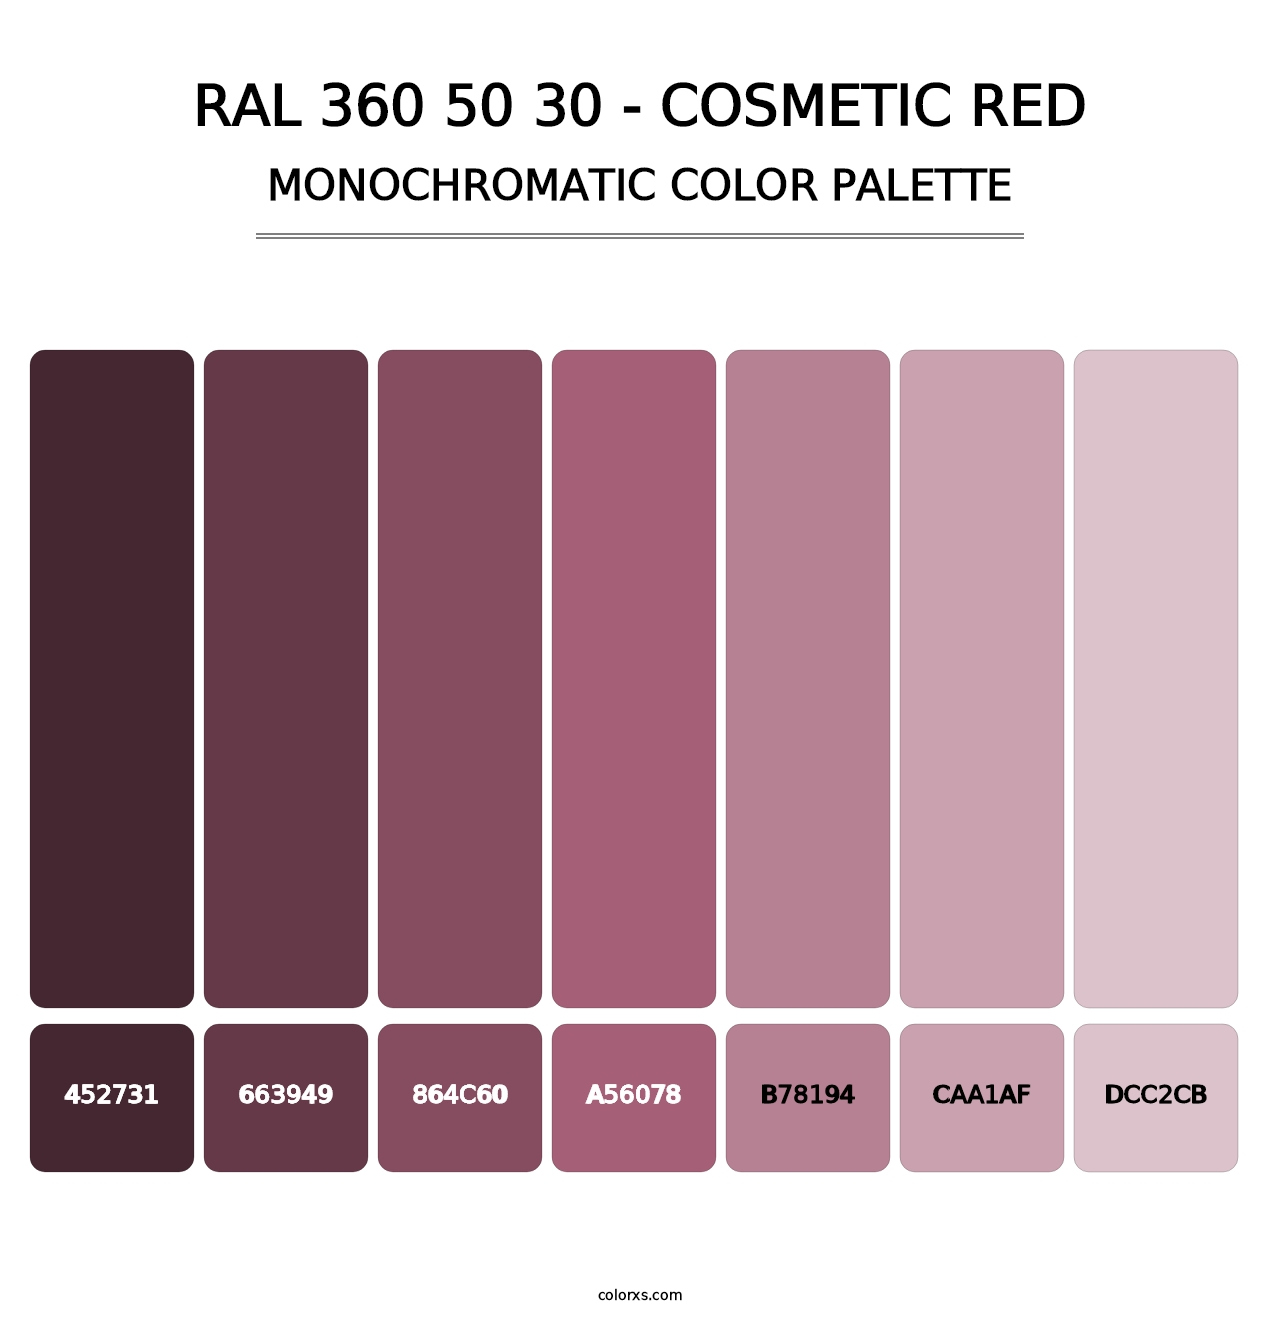 RAL 360 50 30 - Cosmetic Red - Monochromatic Color Palette